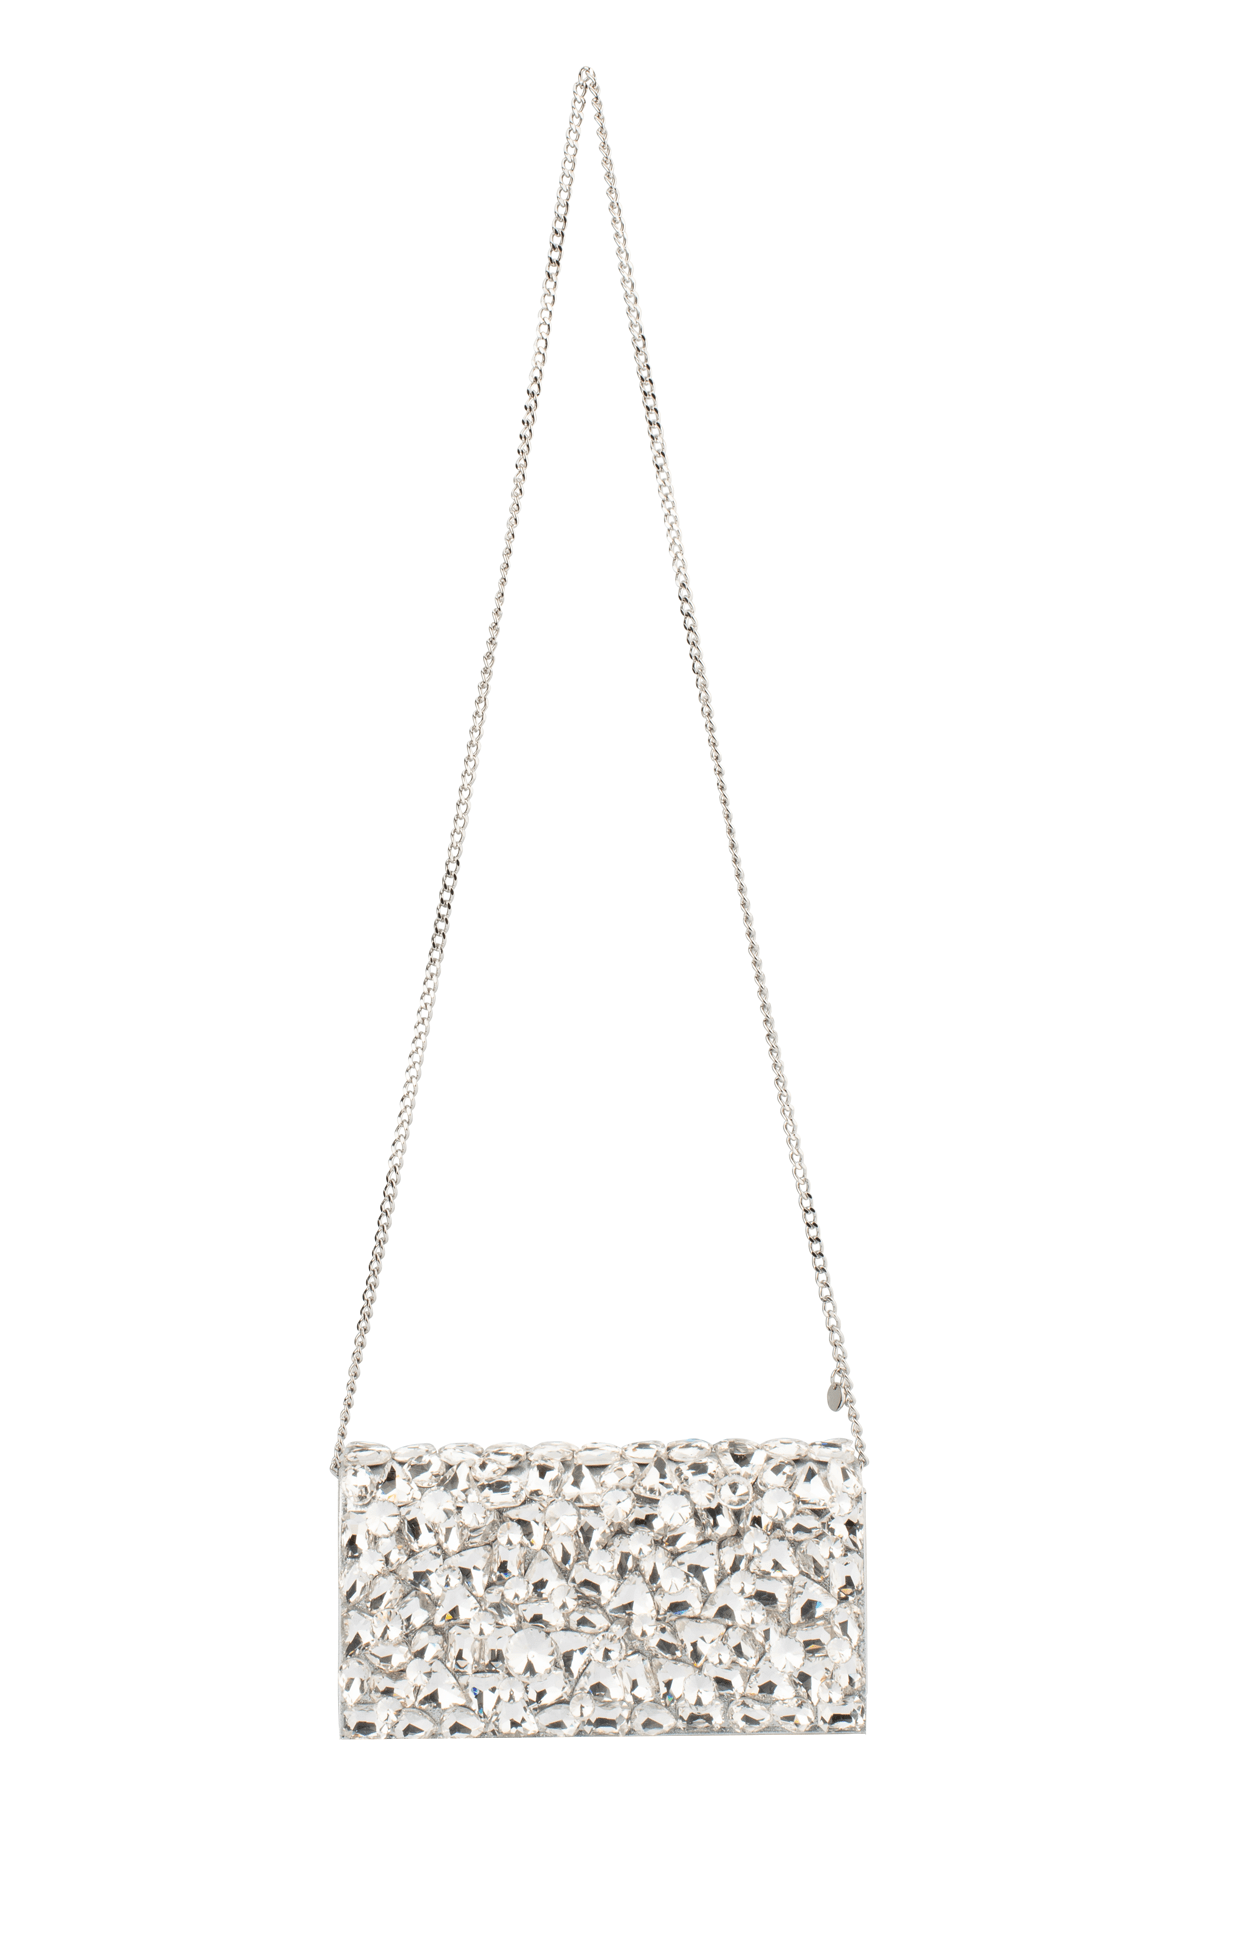 ACCESSORIES Bags Clutches OS / SILVER RENATA CRYSTAL ENCRUSTED CLUTCH